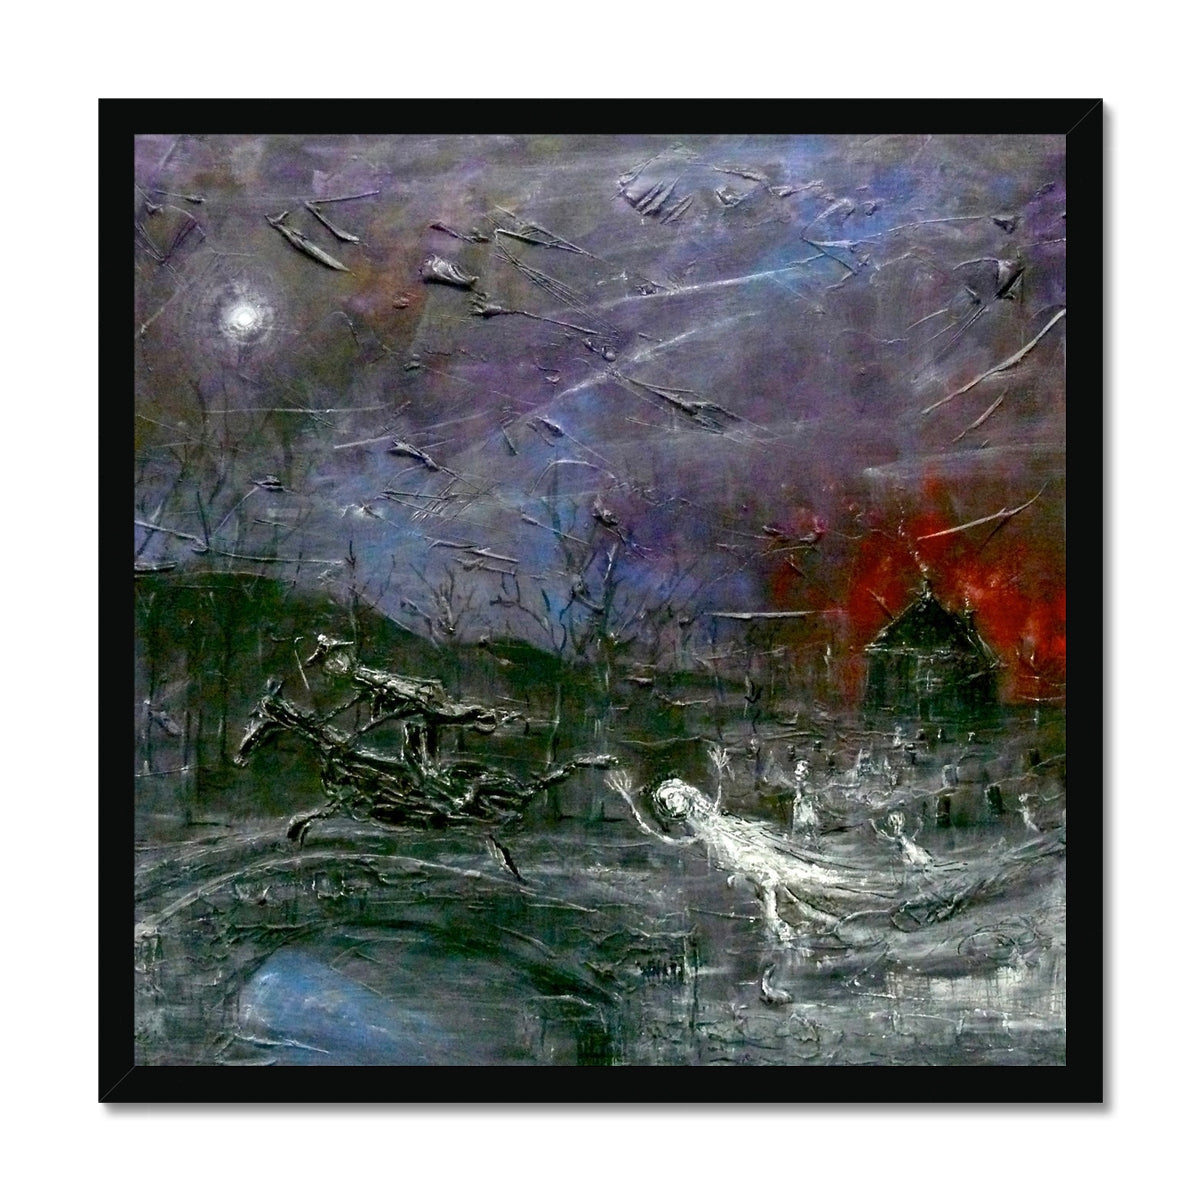 Tam O Shanter Painting | Framed Prints From Scotland-Framed Prints-Abstract & Impressionistic Art Gallery-20"x20"-Black Frame-Paintings, Prints, Homeware, Art Gifts From Scotland By Scottish Artist Kevin Hunter